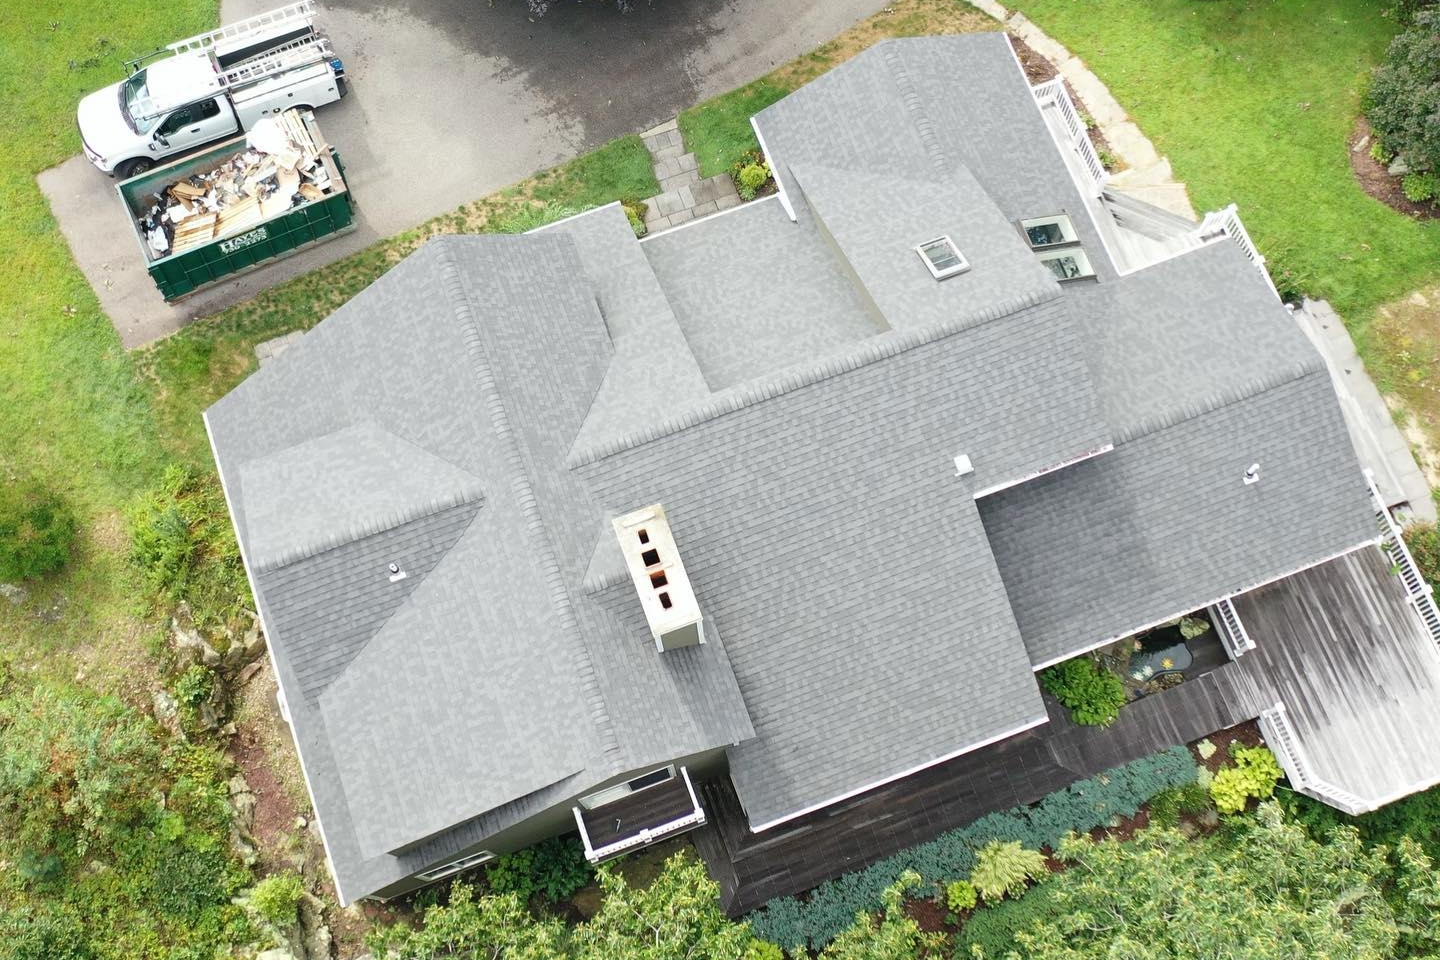 BP Builders Lyme CT | Roofer, Roof Replacement, Roofing Company & General Contractor CT